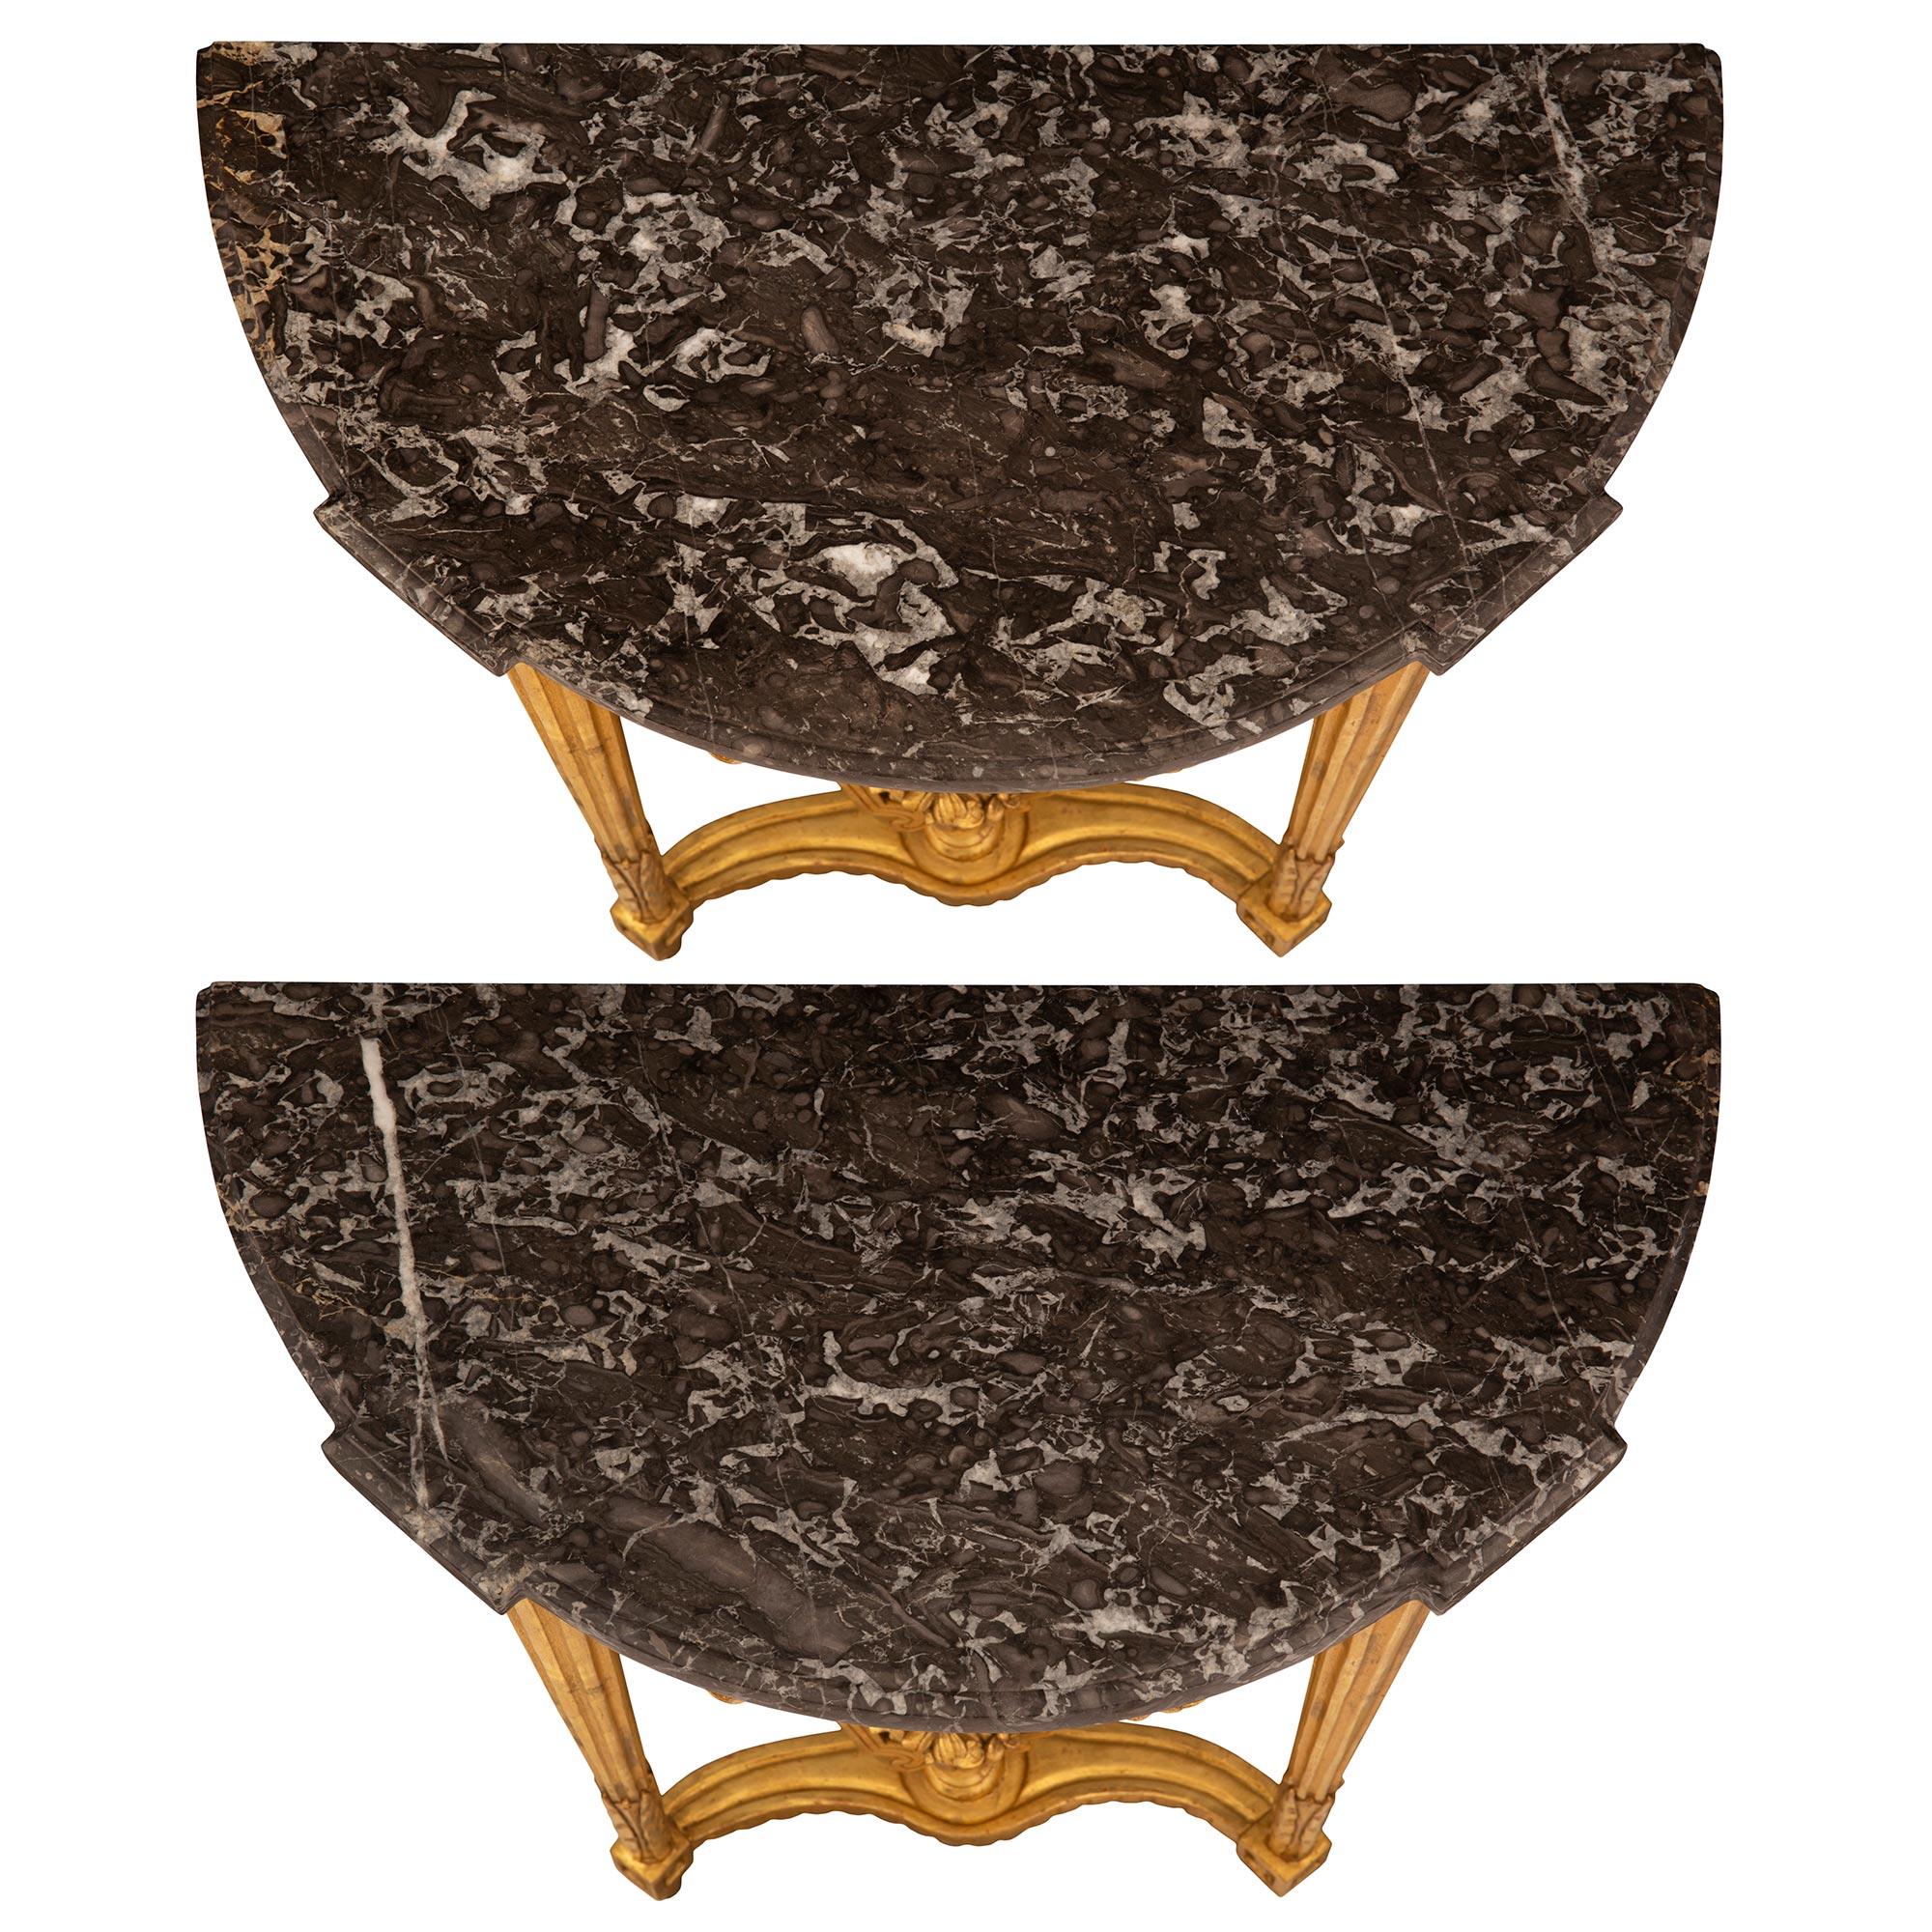 A most elegant and uniquely scaled pair of French 18th century Louis XVI period giltwood and Noir Antique marble consoles. Each small scaled wall mounted console is raised by circular tapered fluted legs with lovely foliate carvings and block